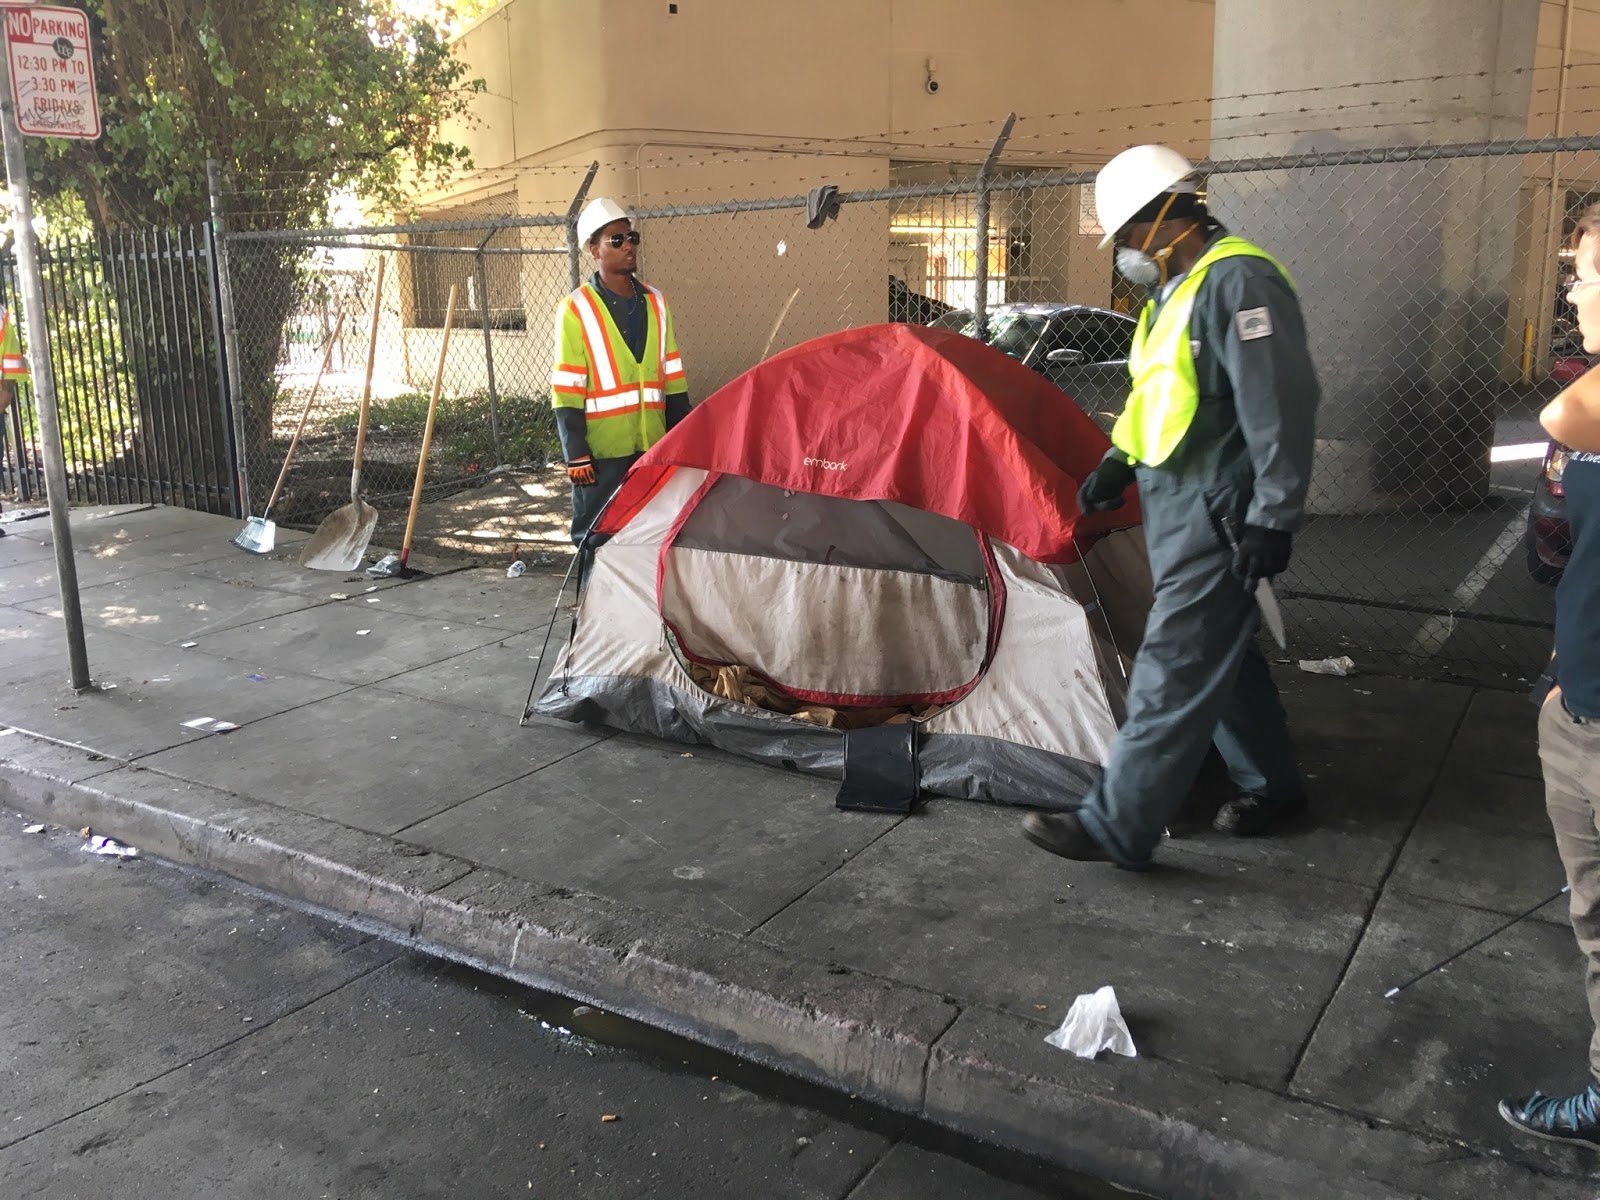 Two city workers remove a curbside tent.